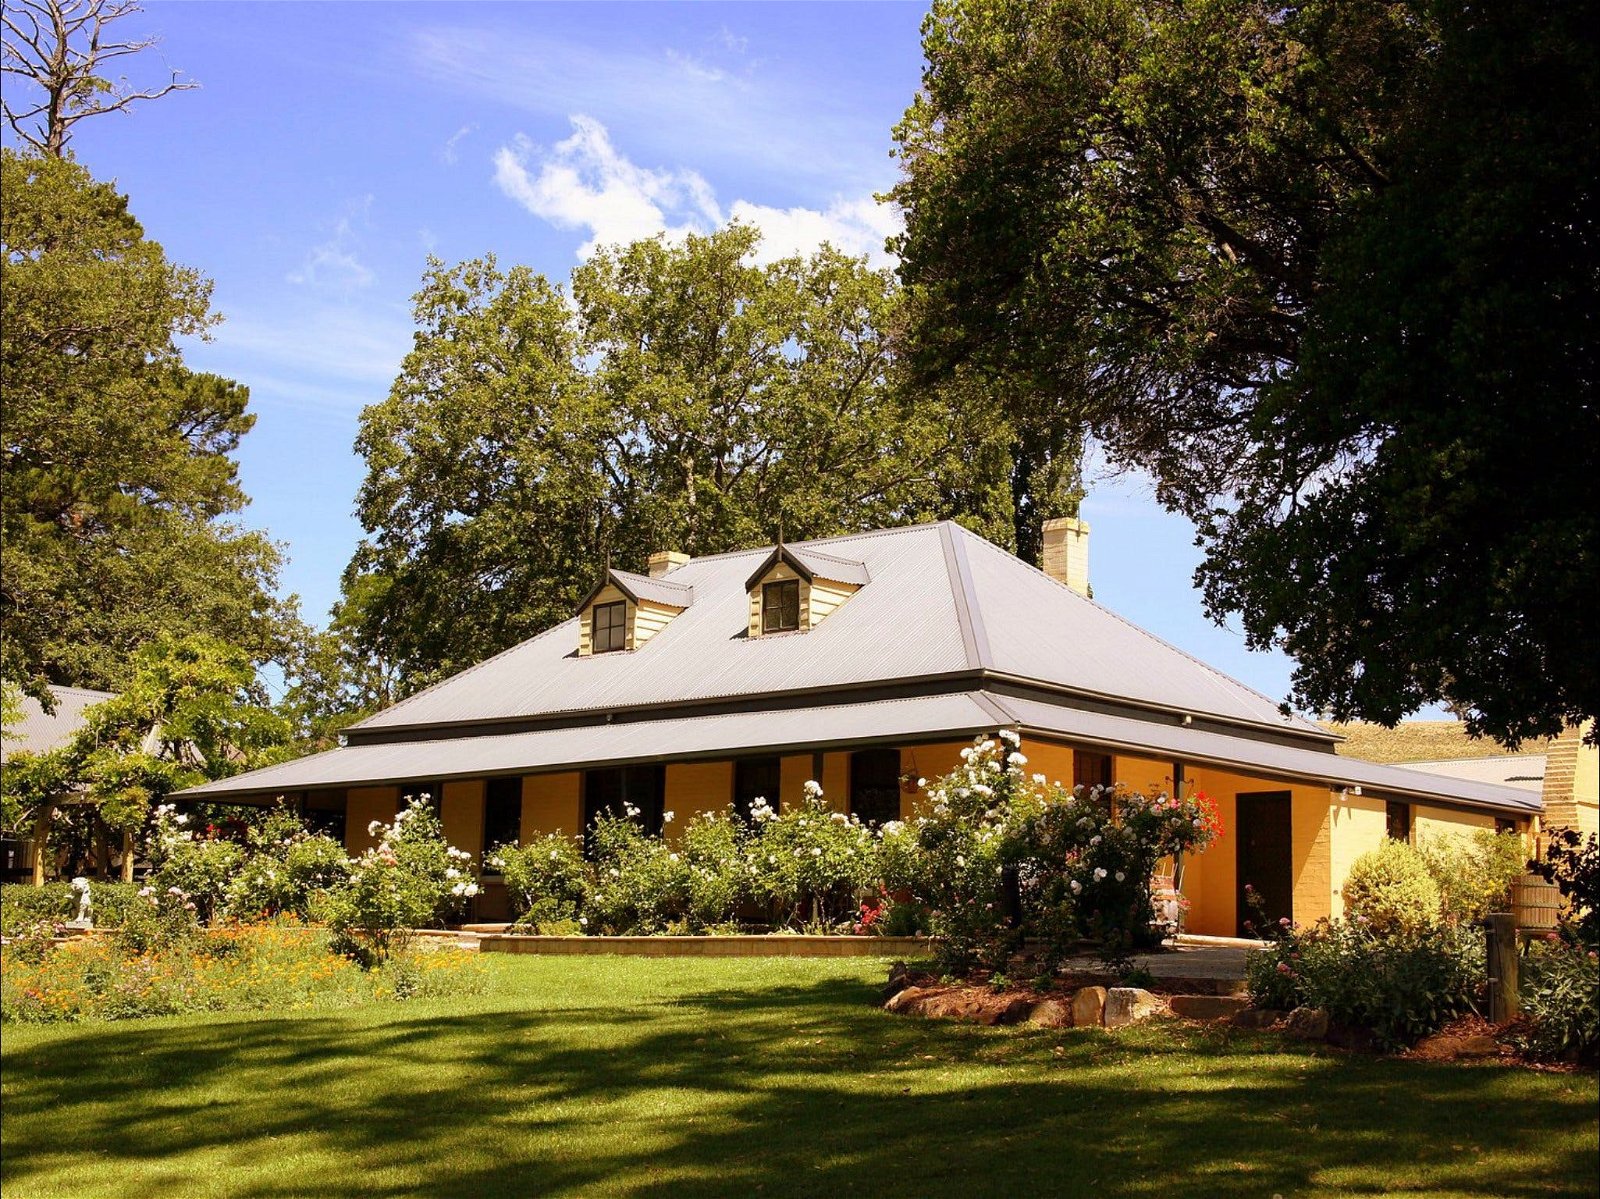 Eling Forest Cellar Door and Cafe - Tourism Gold Coast